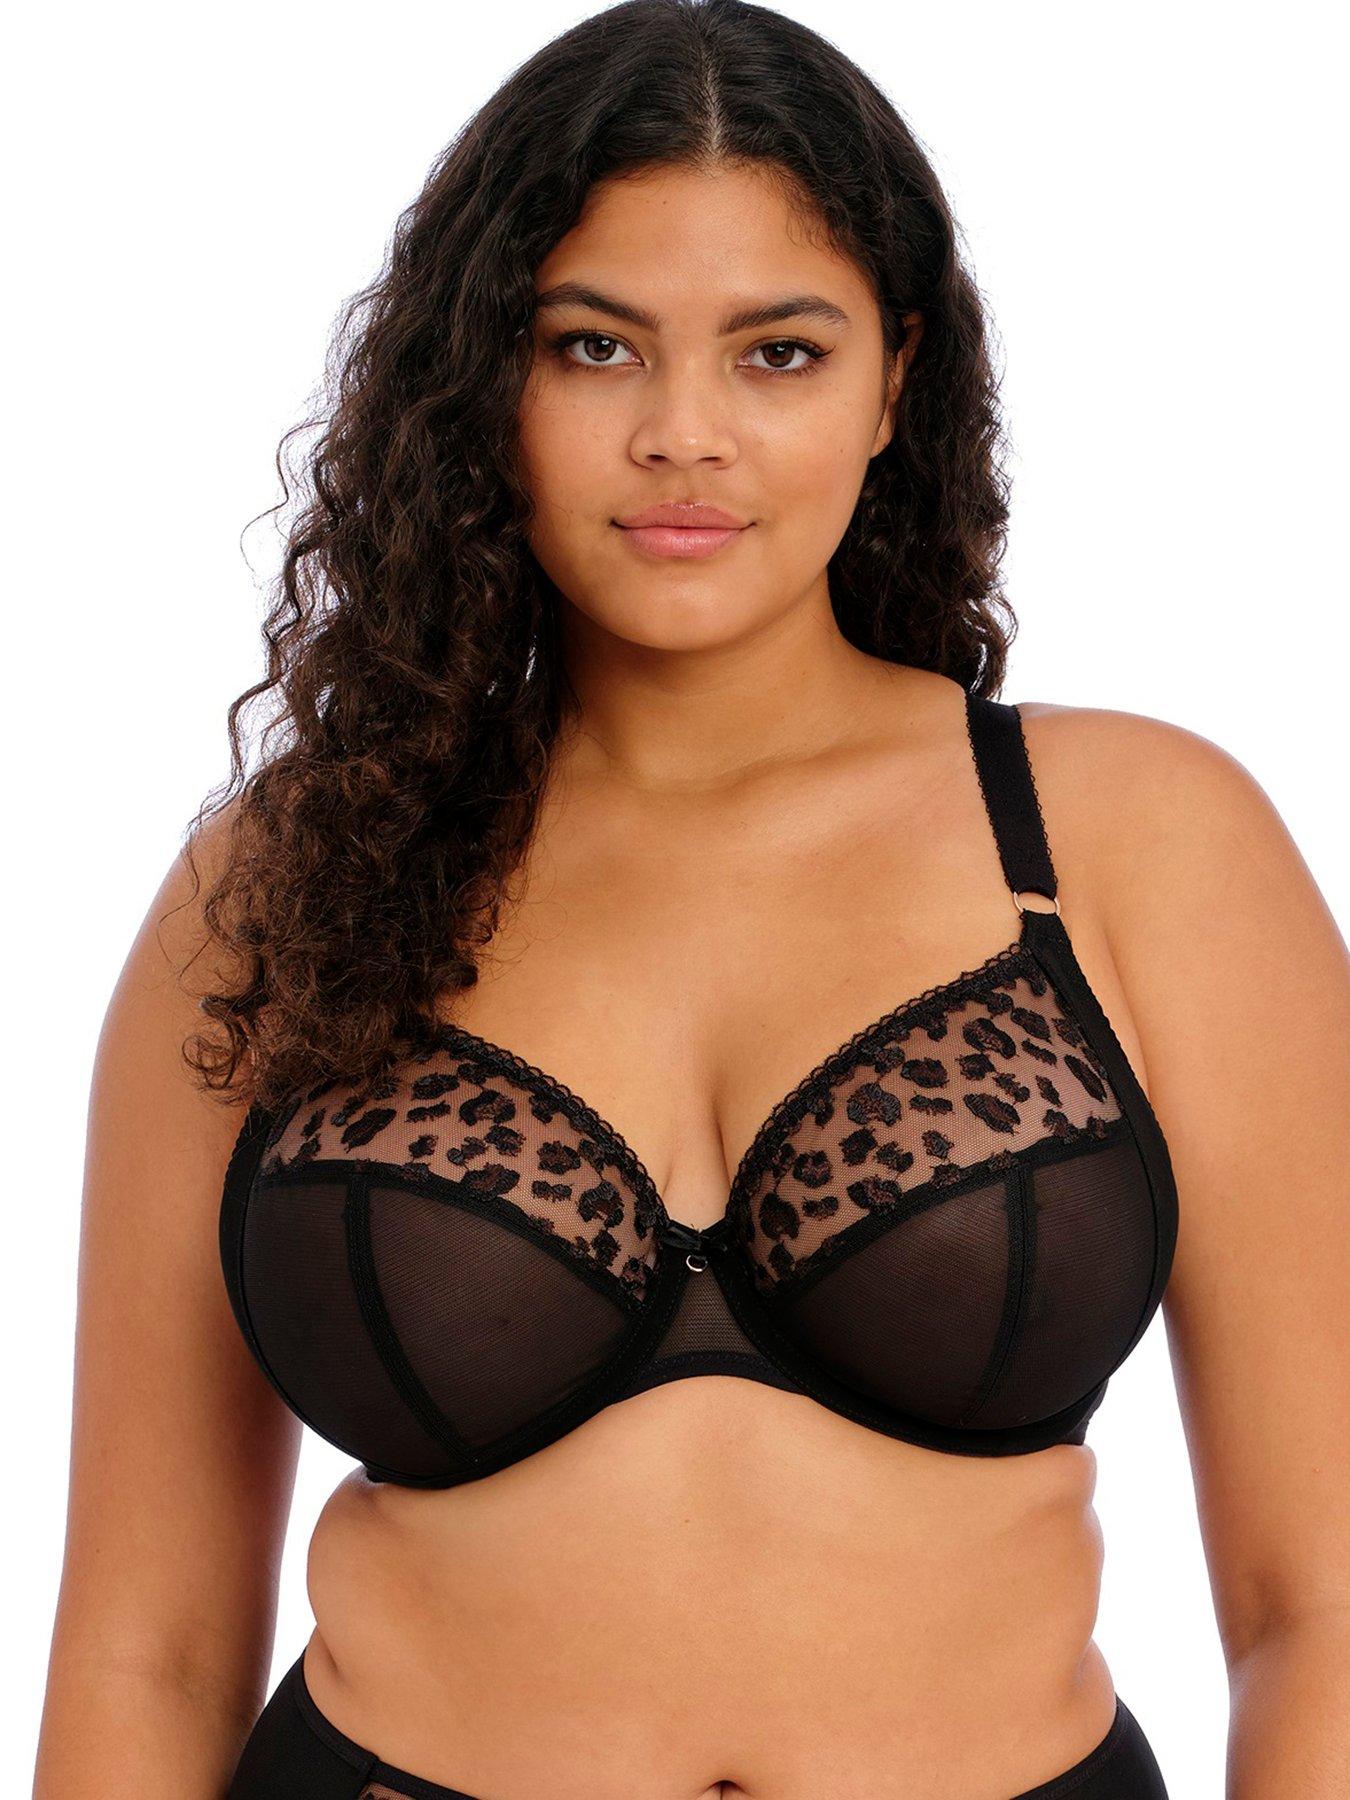 LEEy-world Lingerie for Women Plus Size Wo No Show Seamless